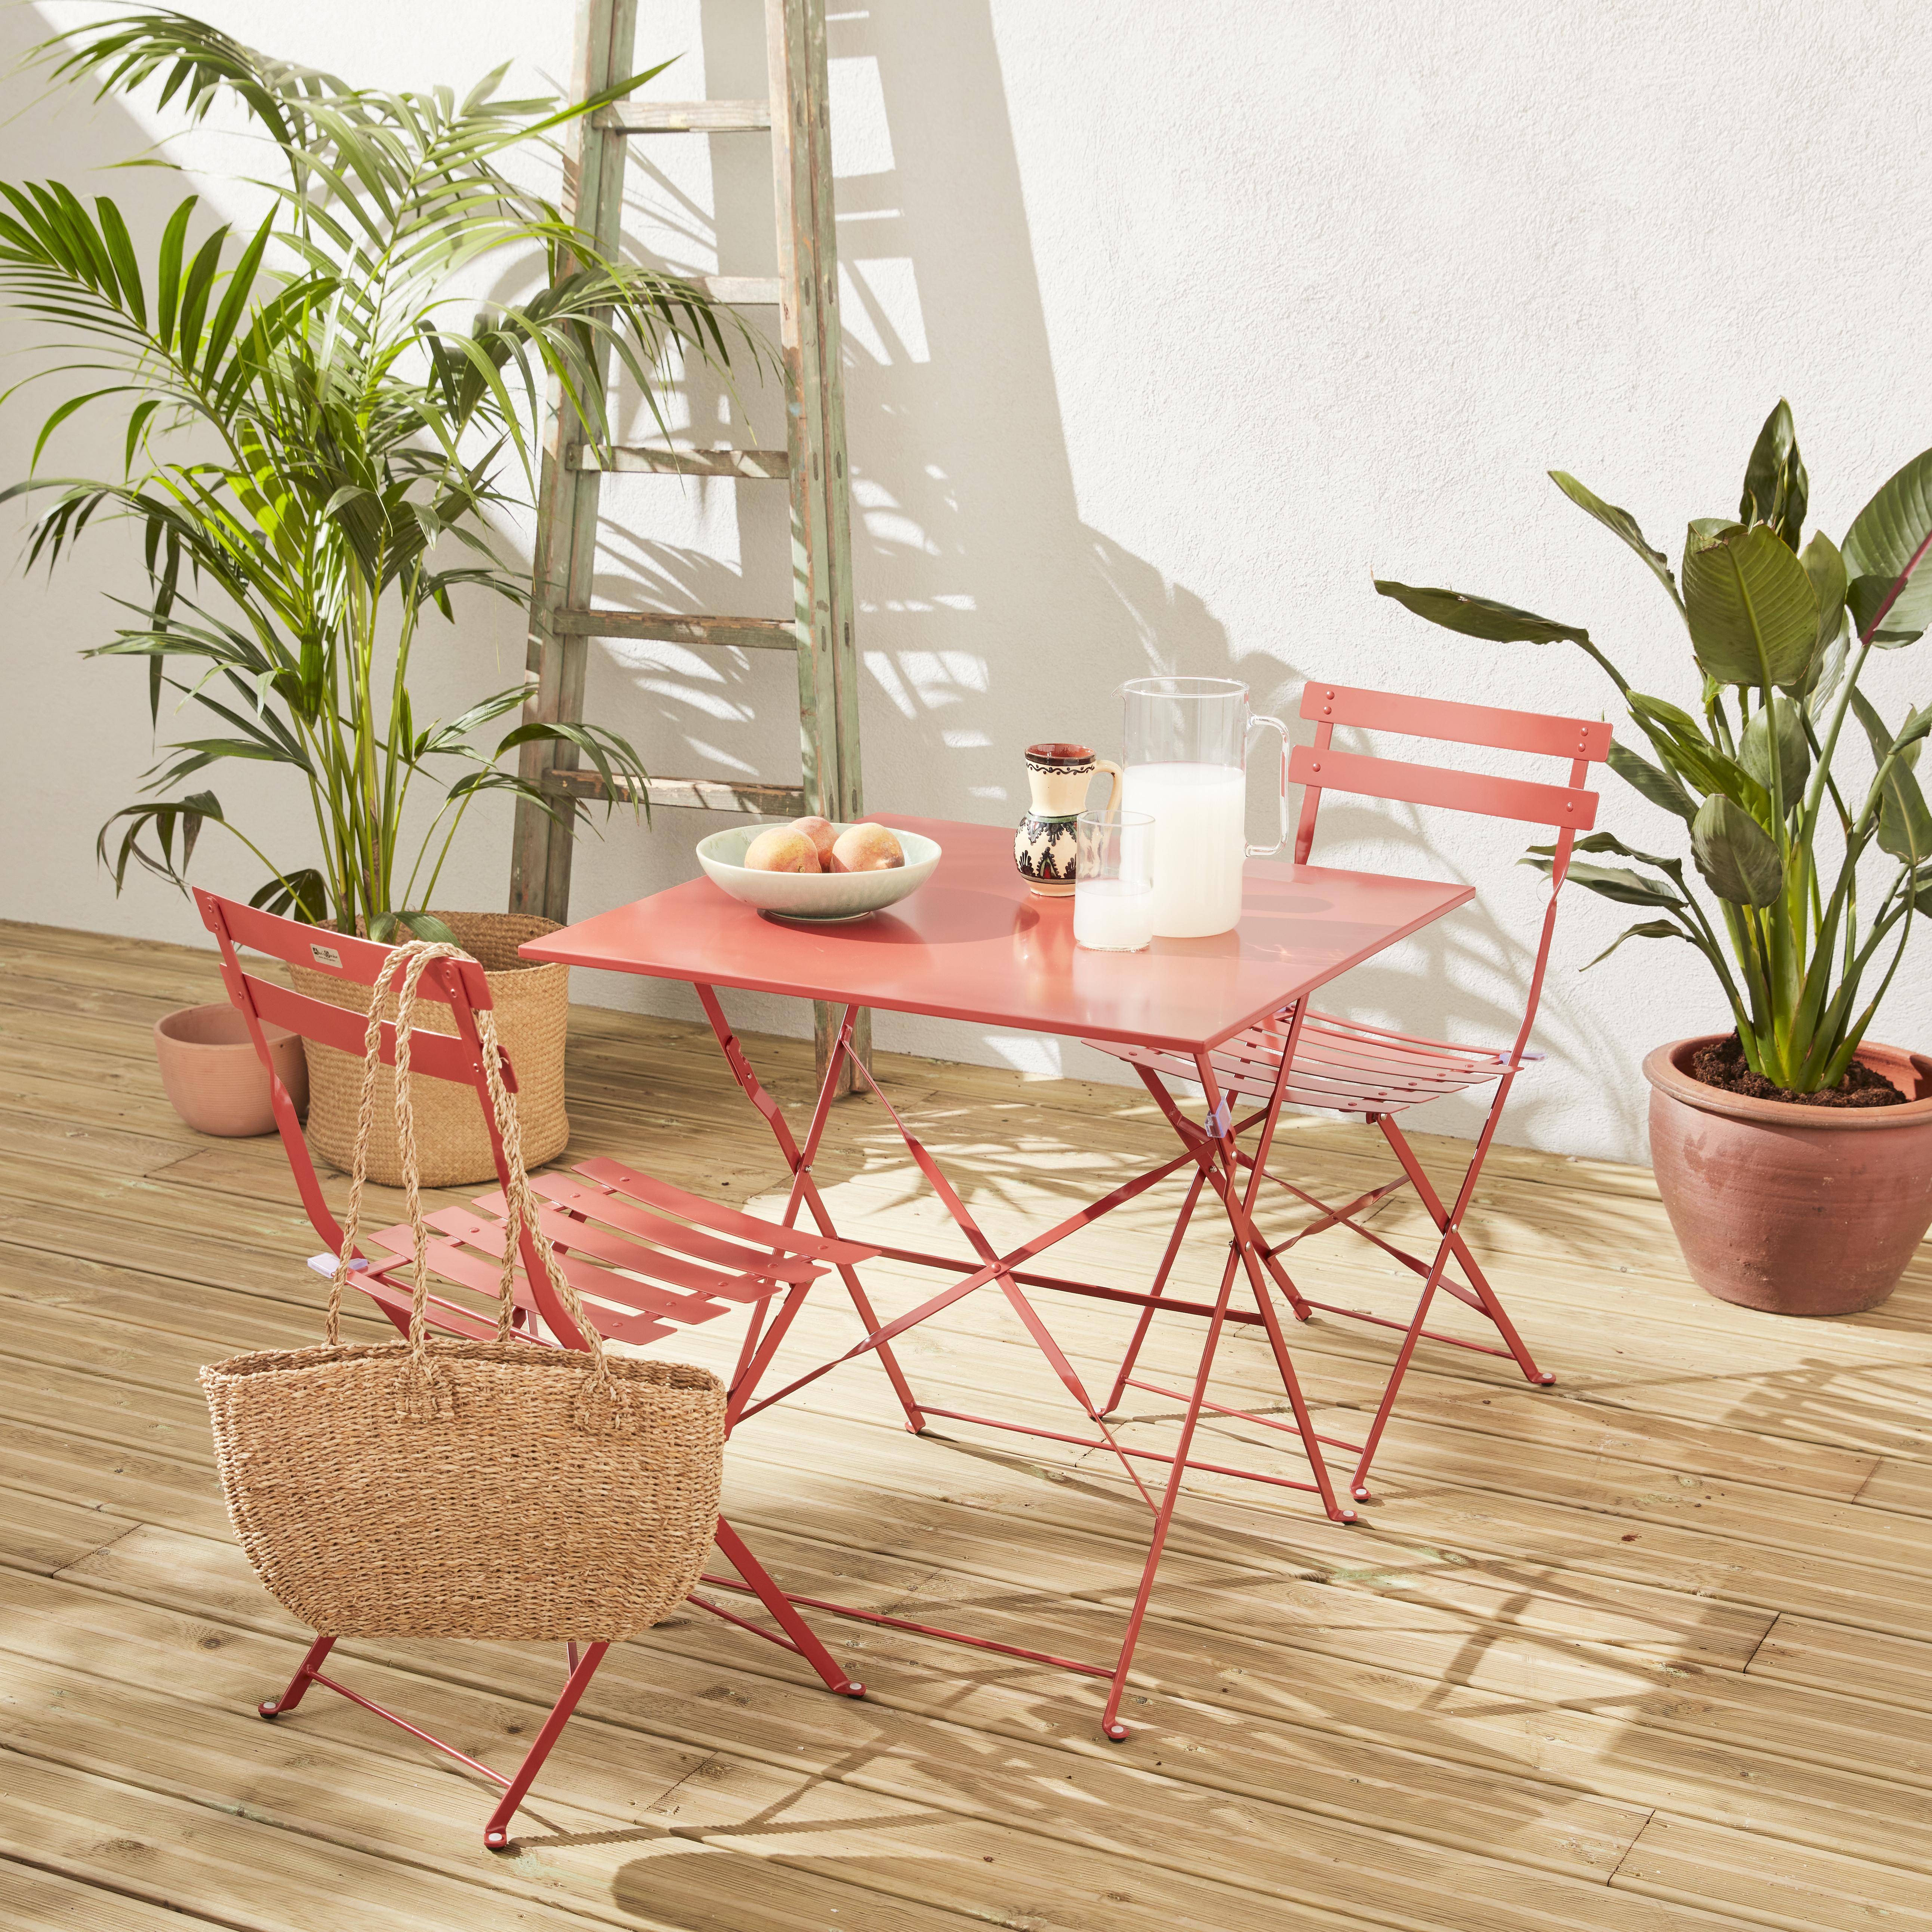 2-seater foldable thermo-lacquered steel bistro garden table with chairs, 70x70cm - Emilia - Terracotta Photo1